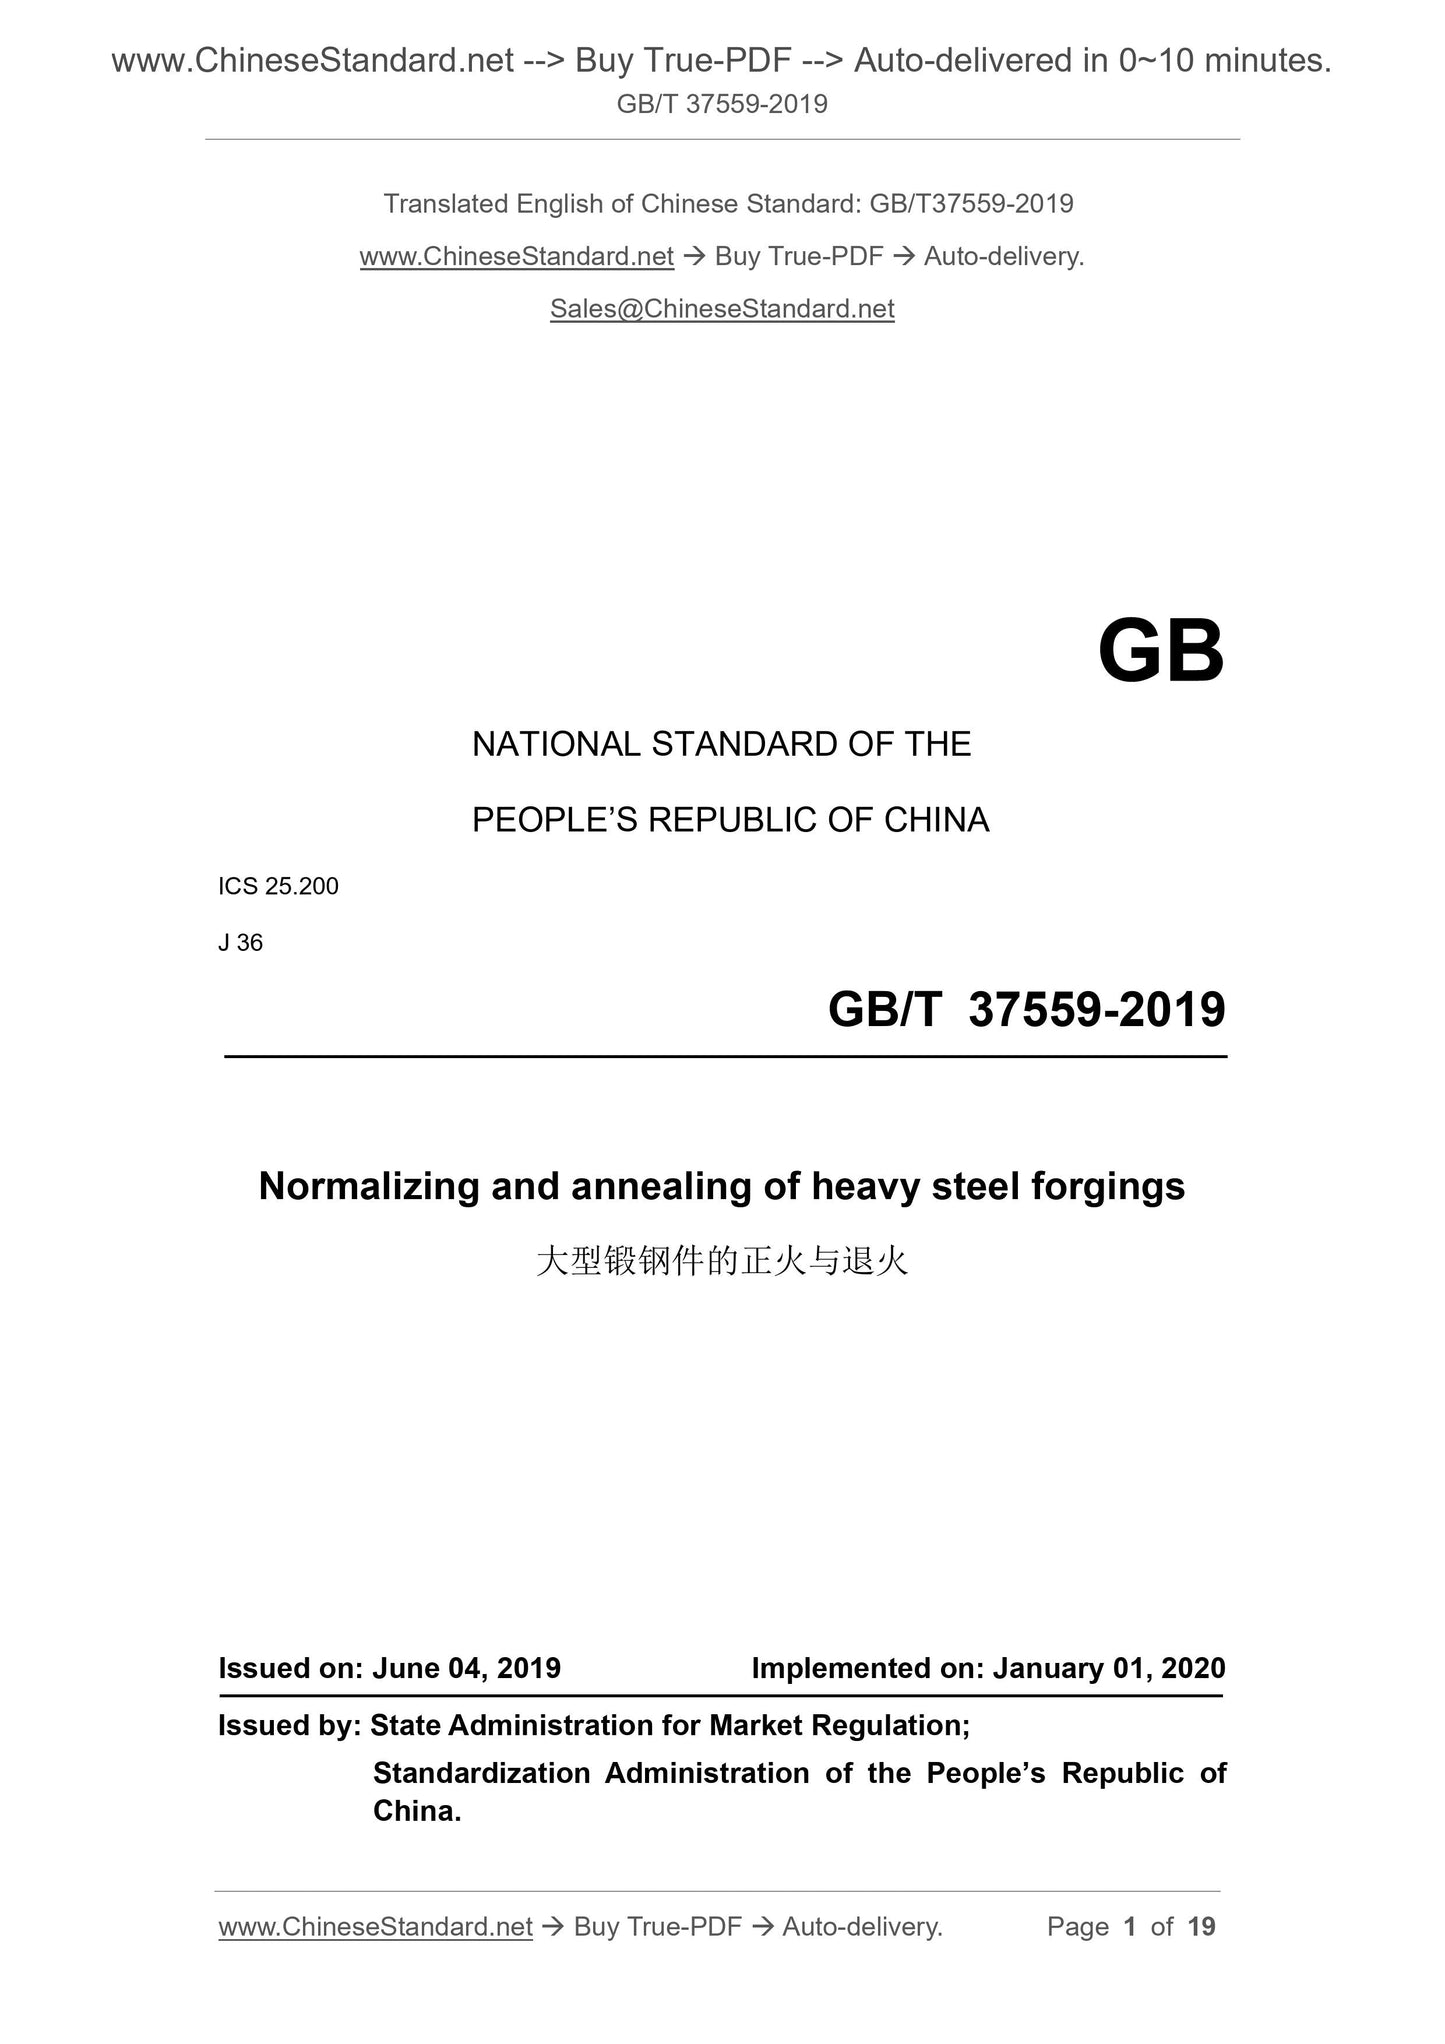 GB/T 37559-2019 Page 1